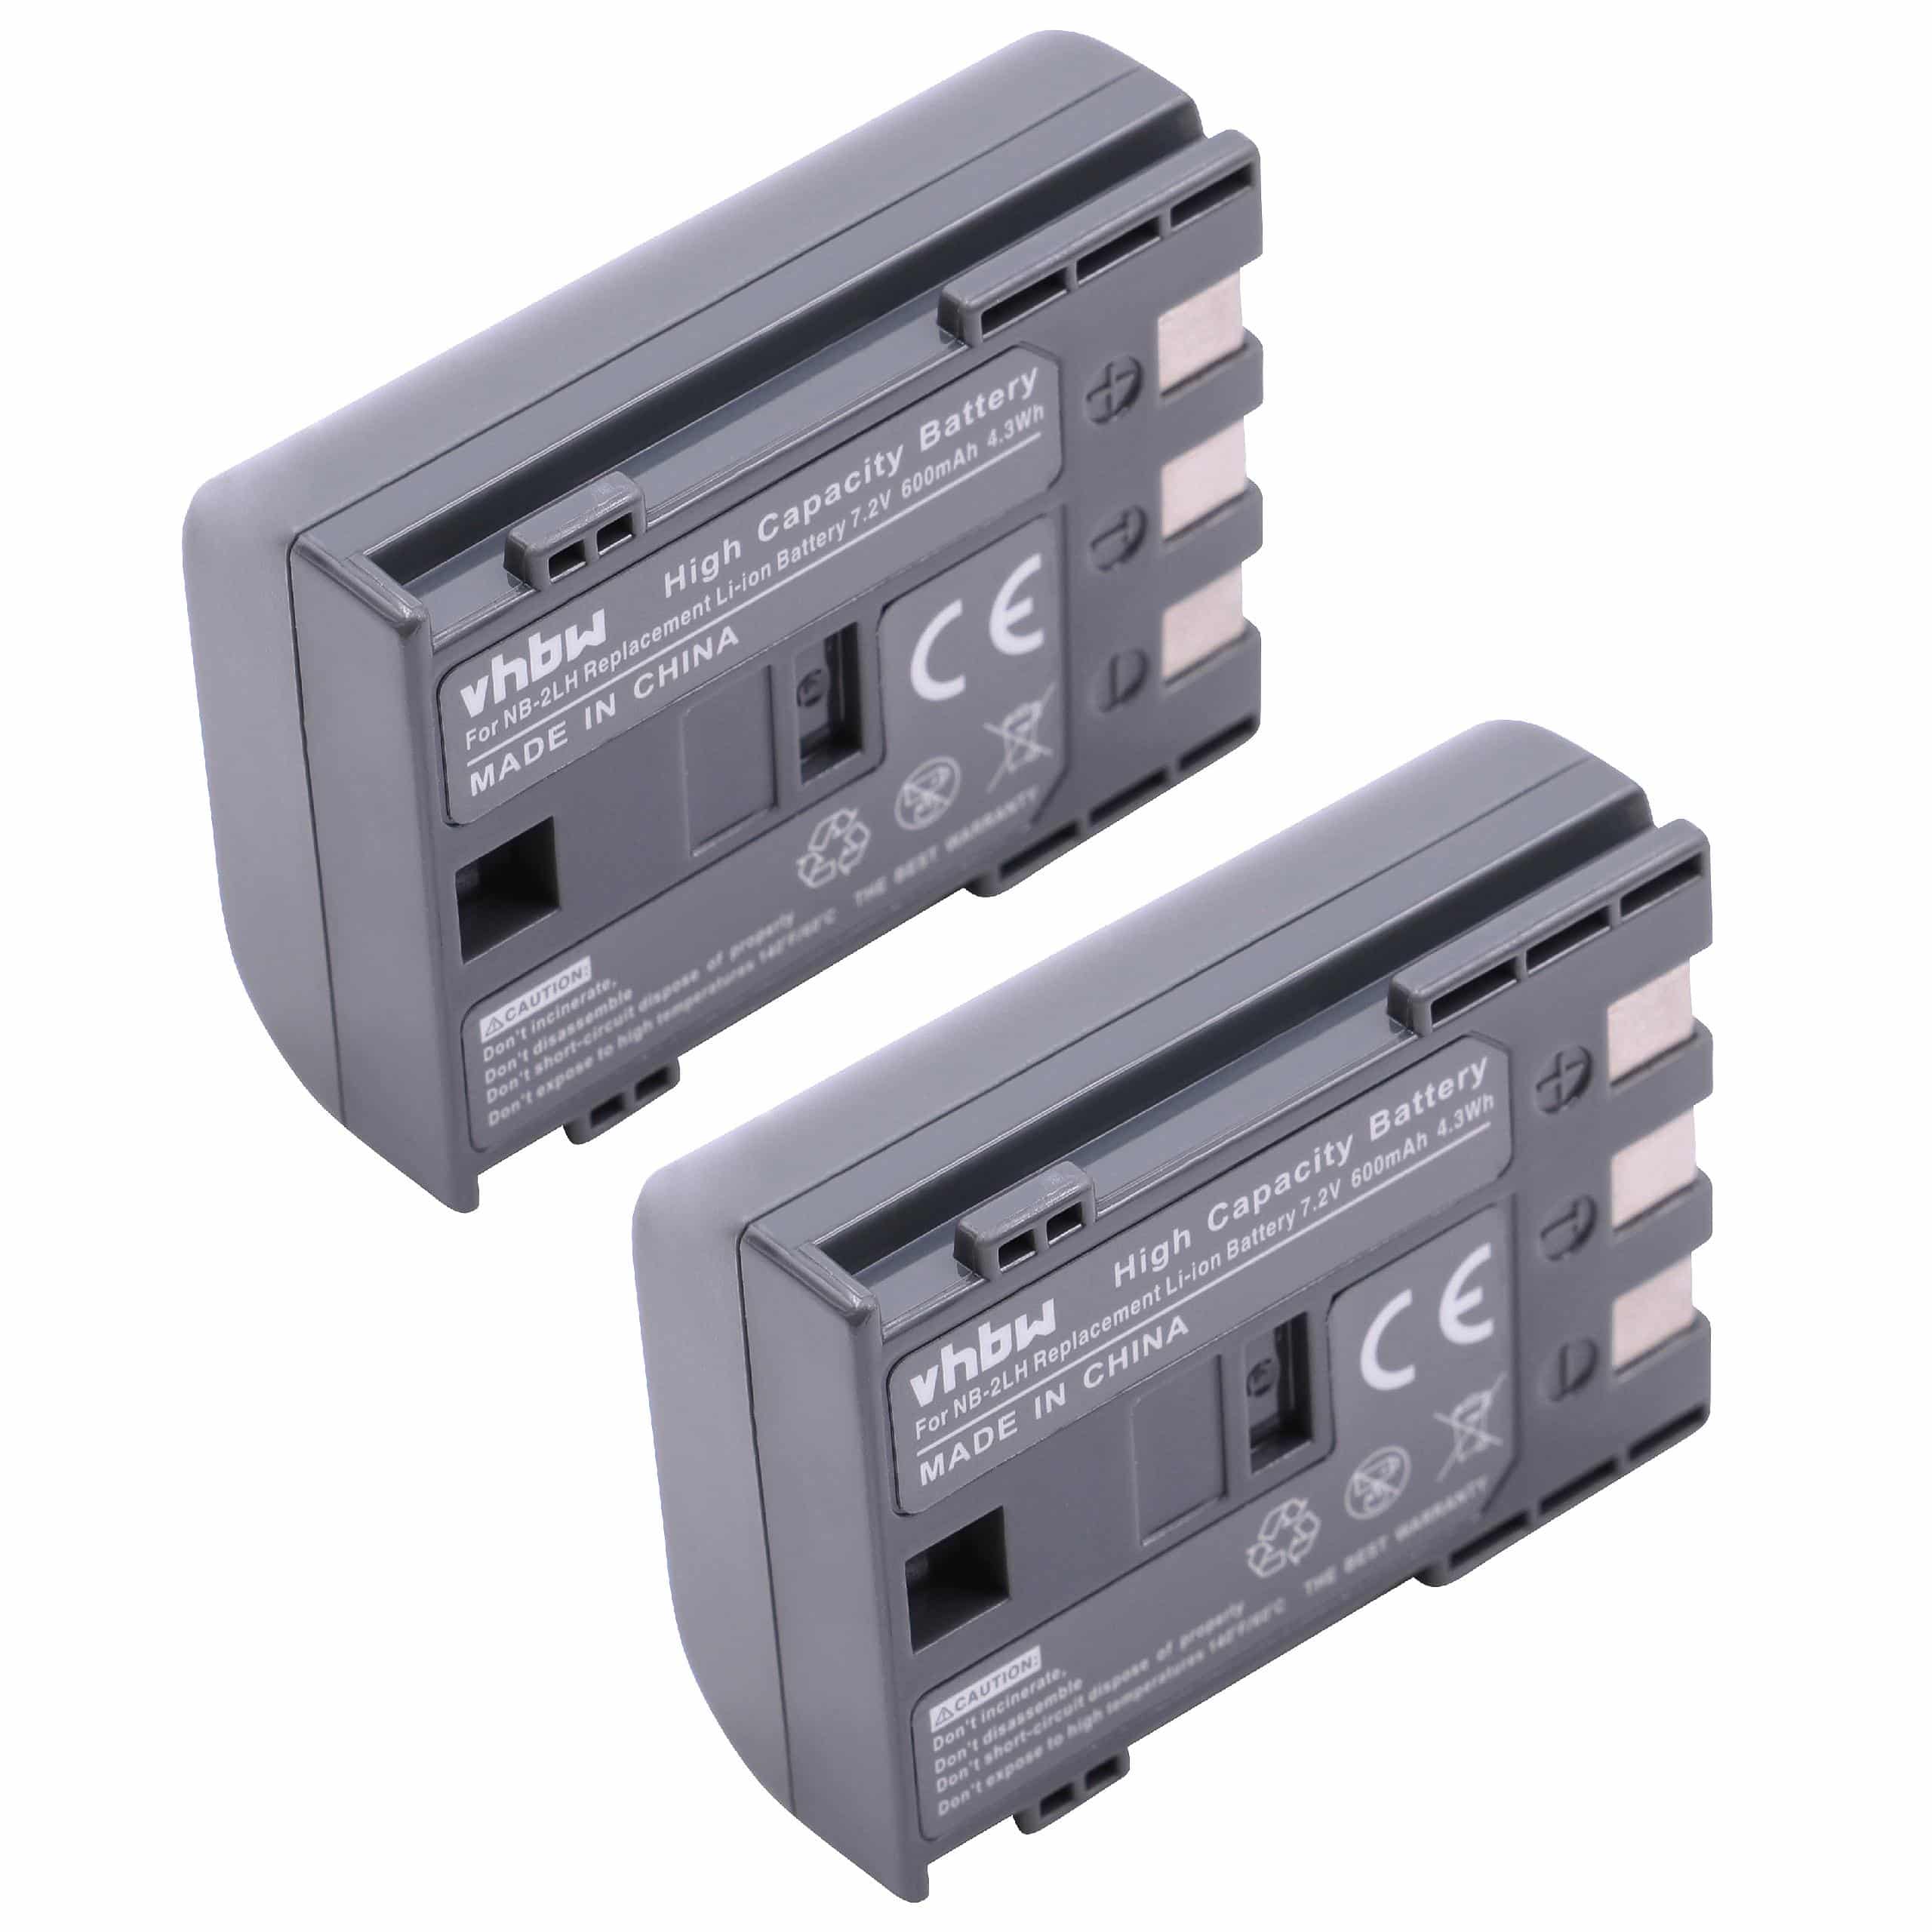 Videocamera Battery (2 Units) Replacement for Canon NB-2LH, NB-2L - 600mAh 7.2V Li-Ion